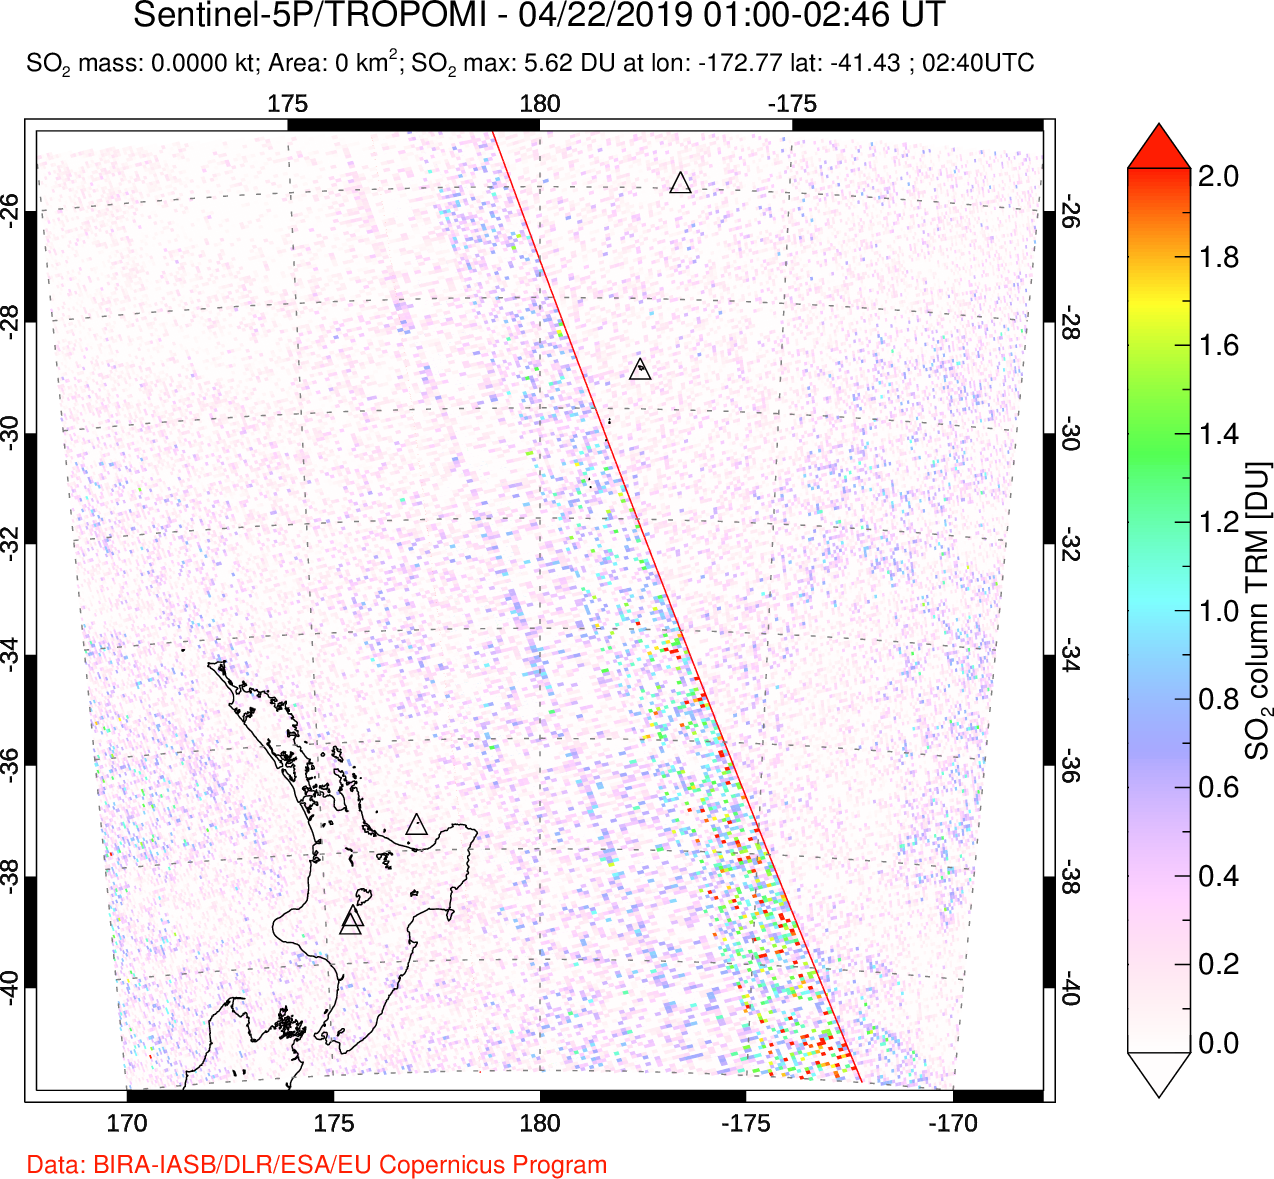 A sulfur dioxide image over New Zealand on Apr 22, 2019.